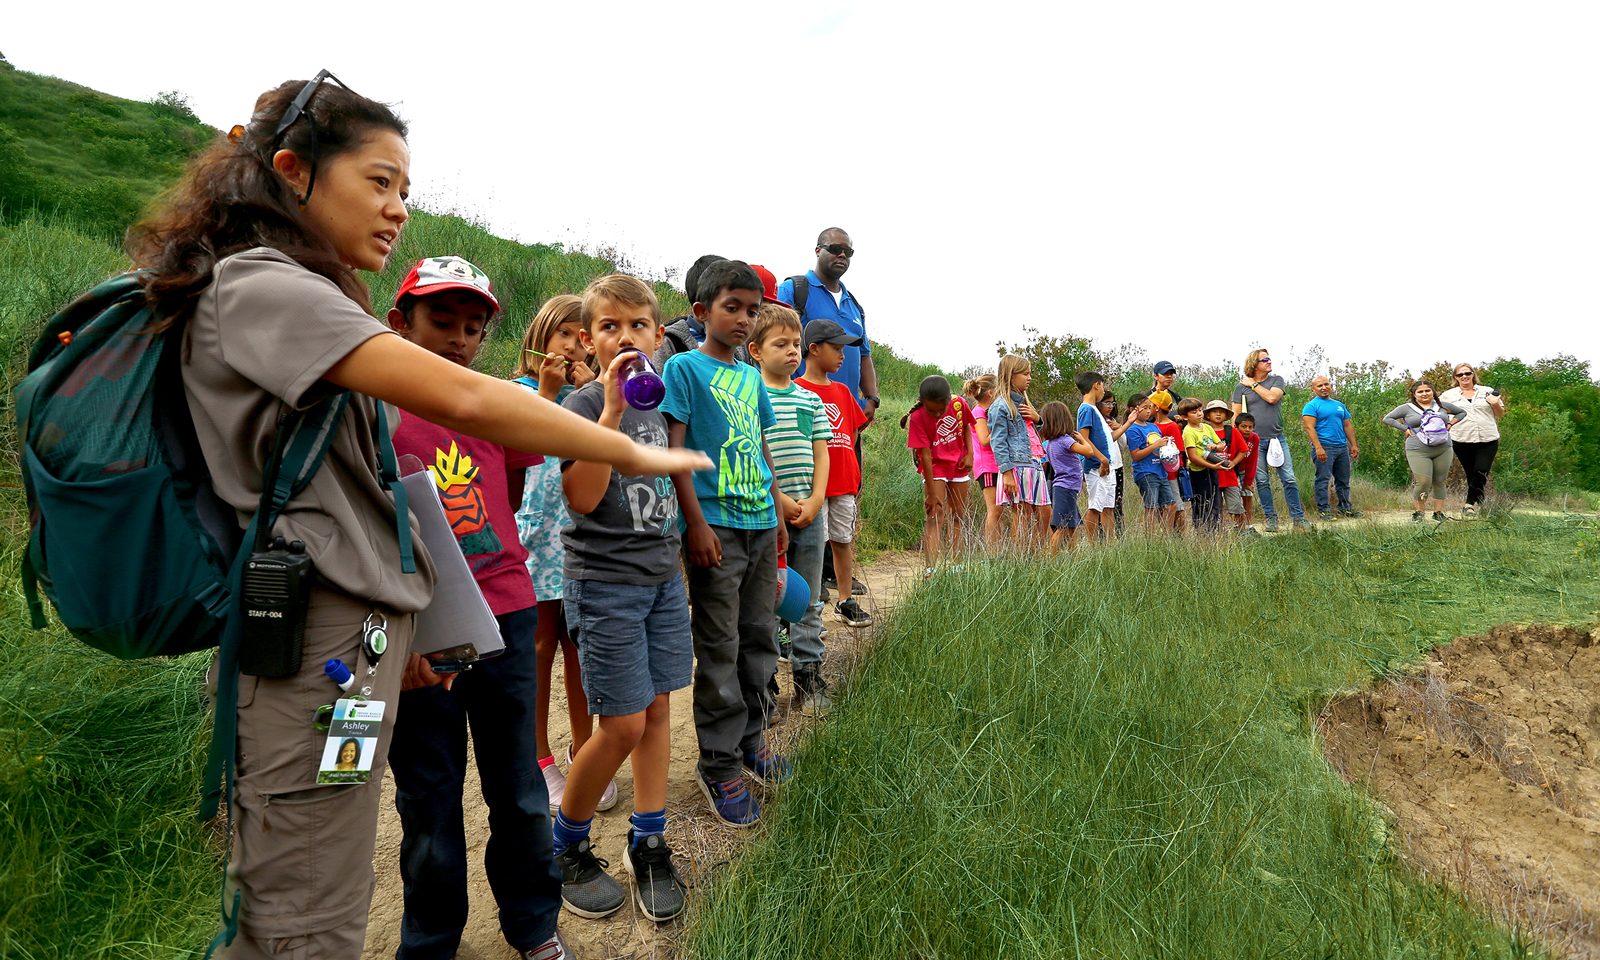 Bren Foundation helps boys and girls discover open space